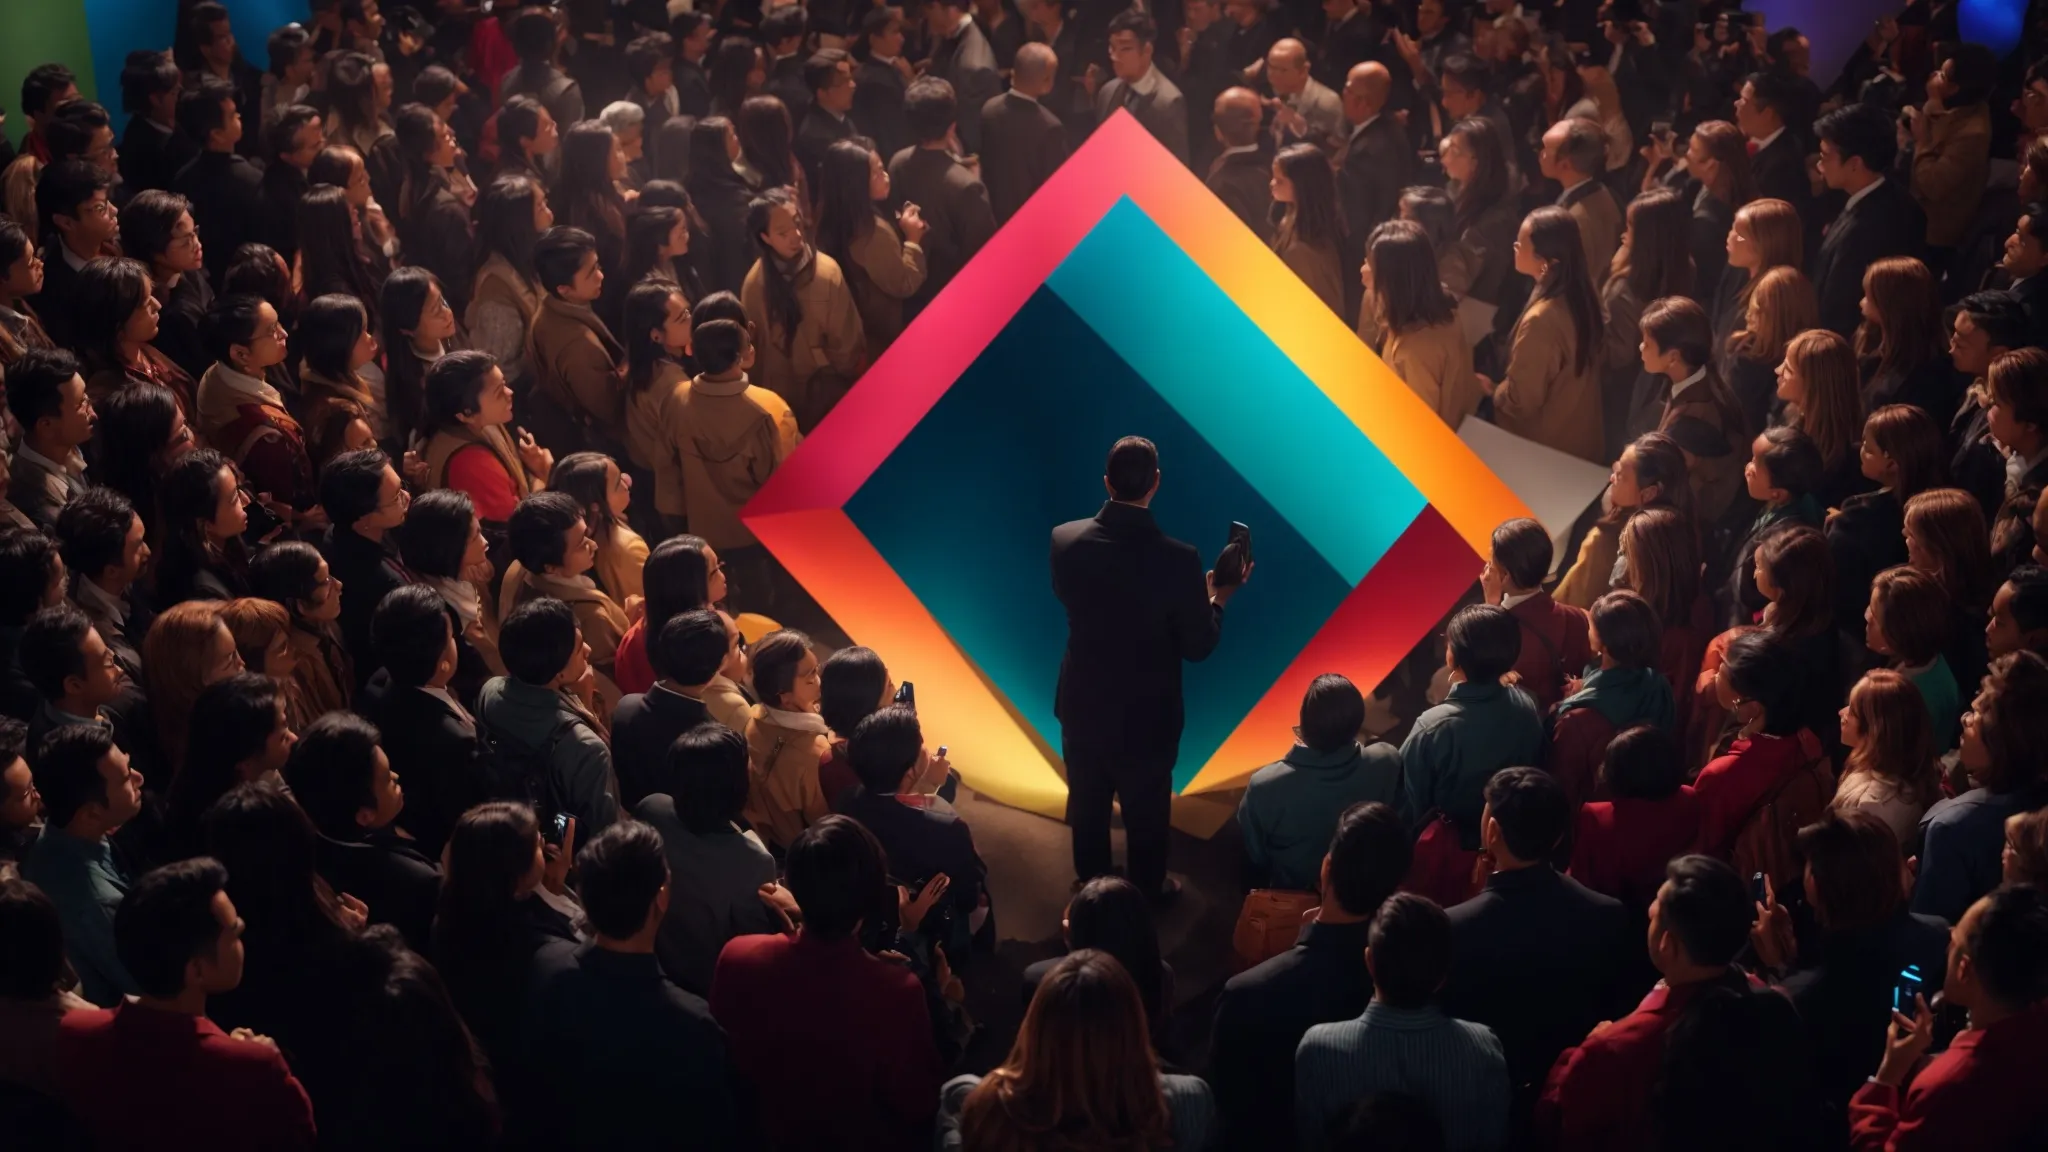 a speaker stands before a diverse crowd, illuminated under a spotlight, as they unveil a large canvas portraying abstract shapes gradually filled with vibrant colors.